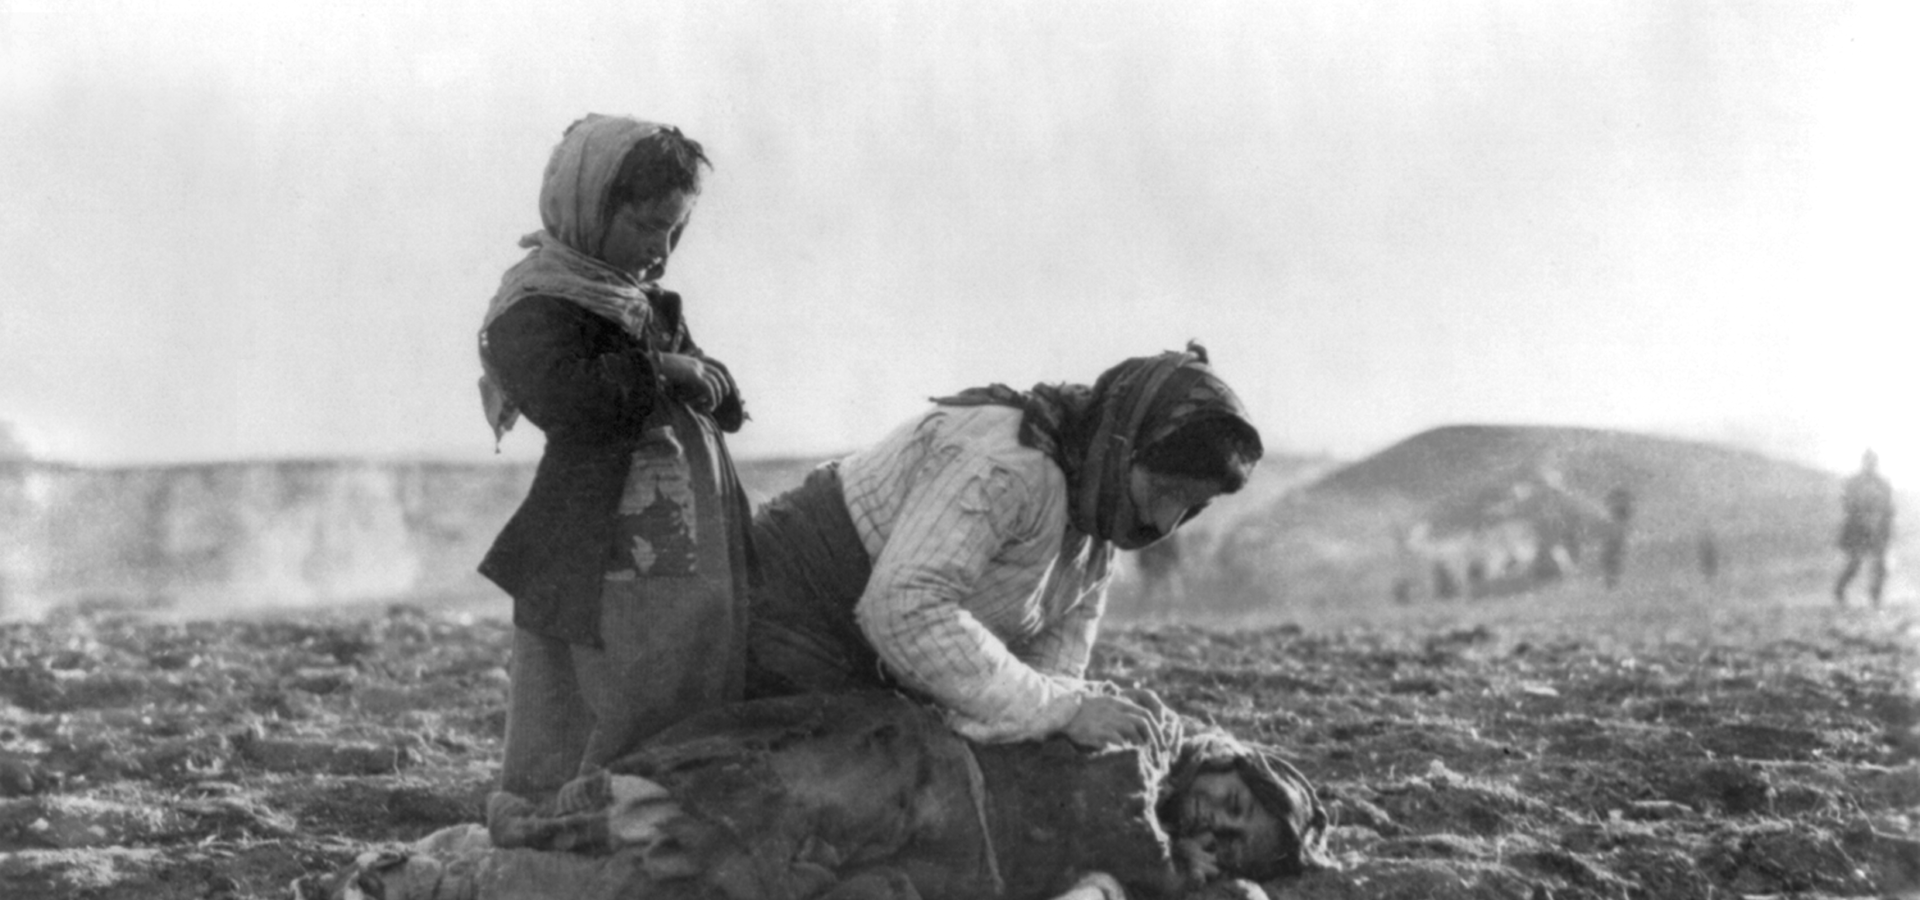 An Armenian woman kneeling beside a dead child in field "within sight of help and safety at Aleppo", an Ottoman city.